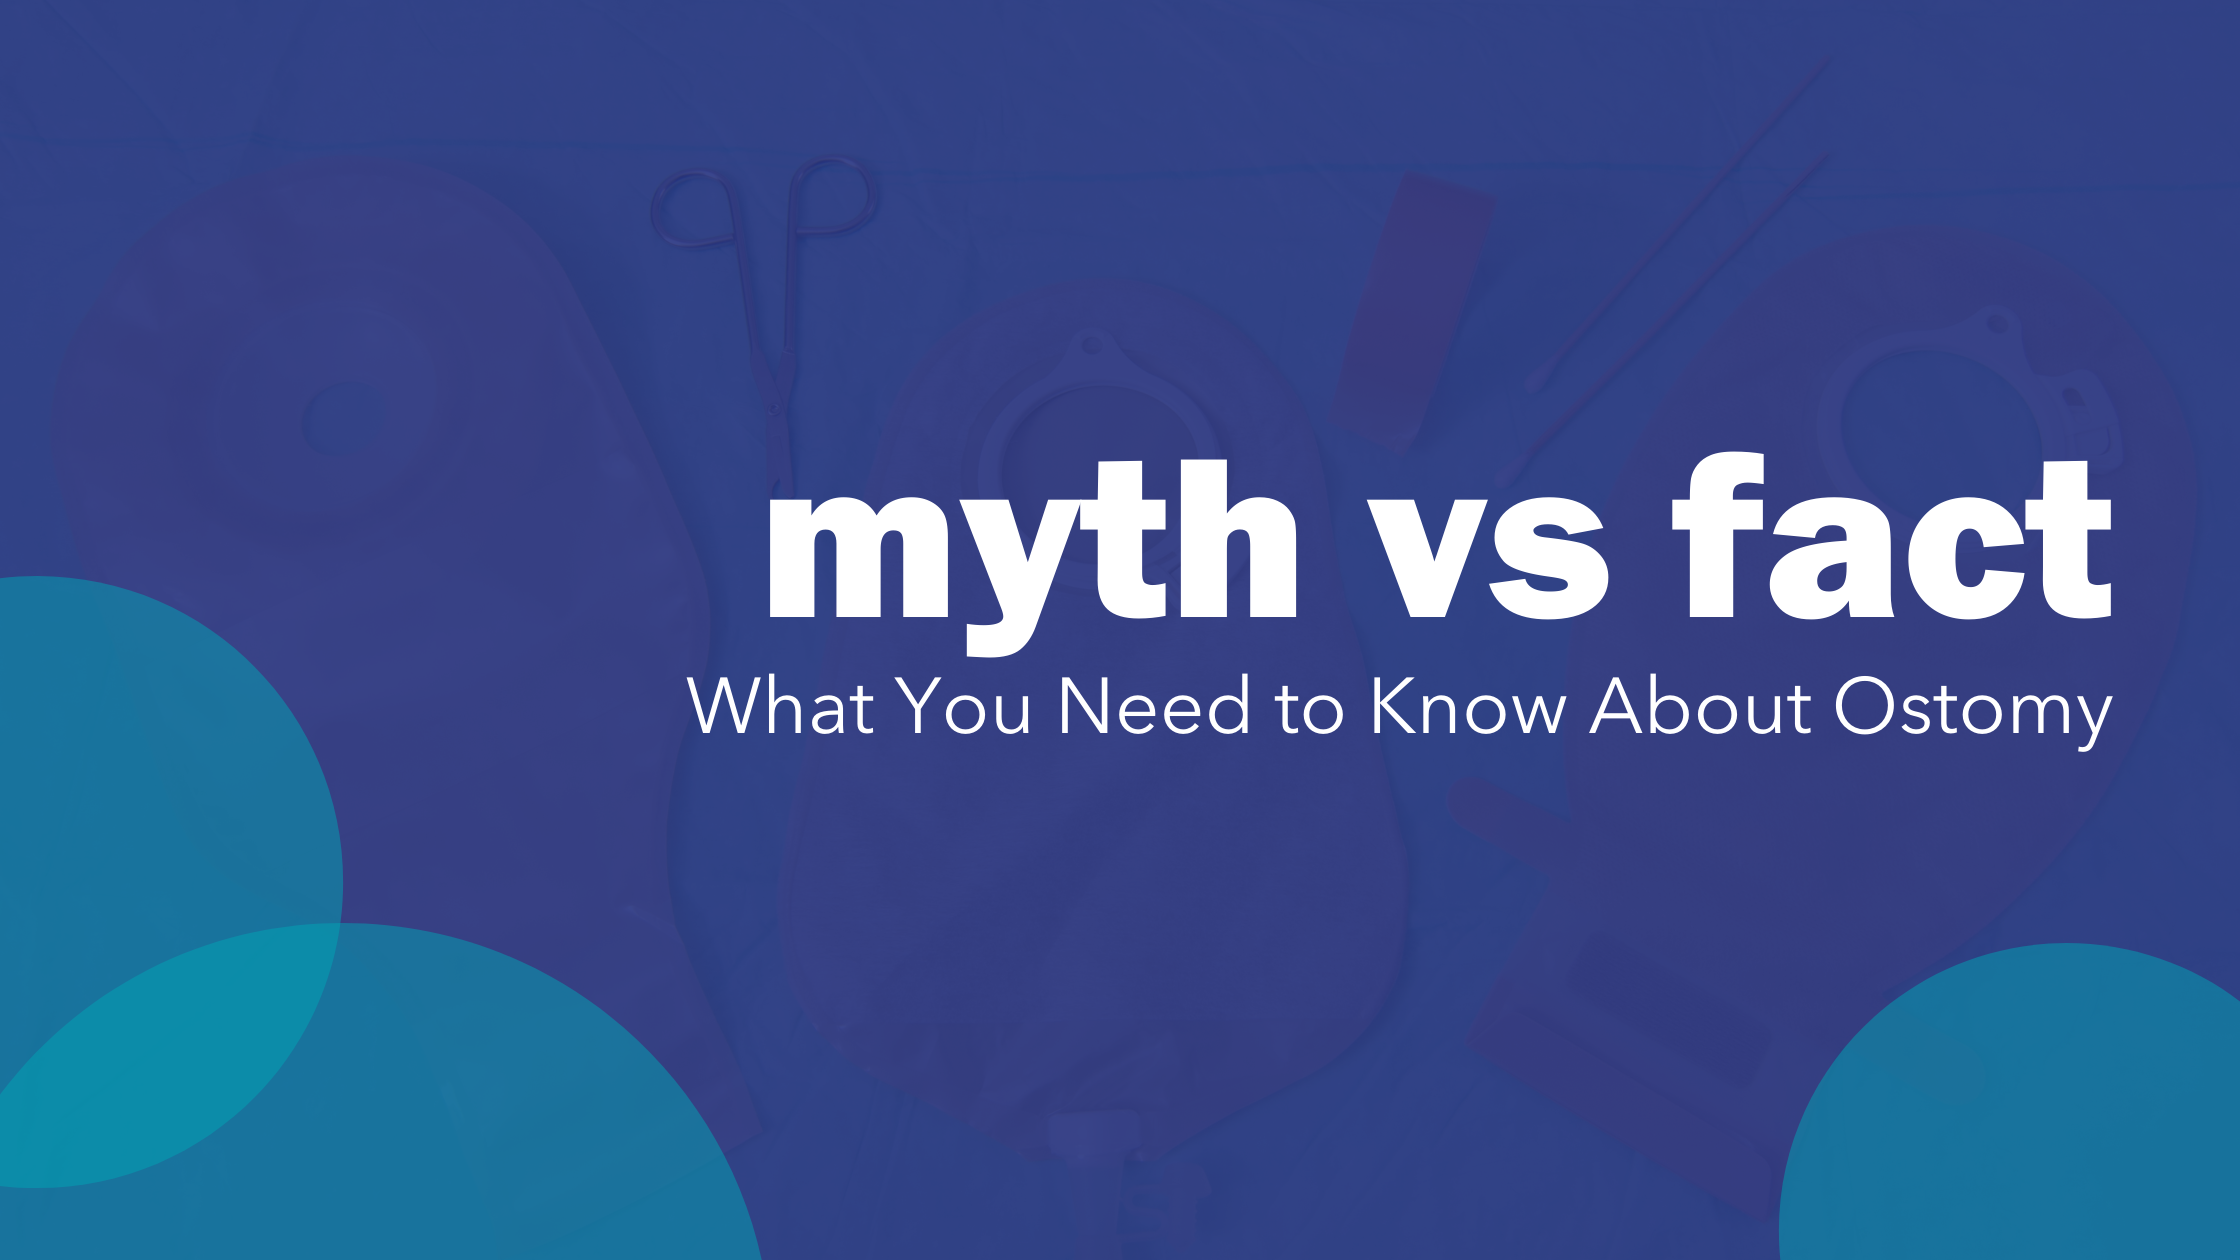 Myths Vs Facts - What You Need to Know About Ostomy